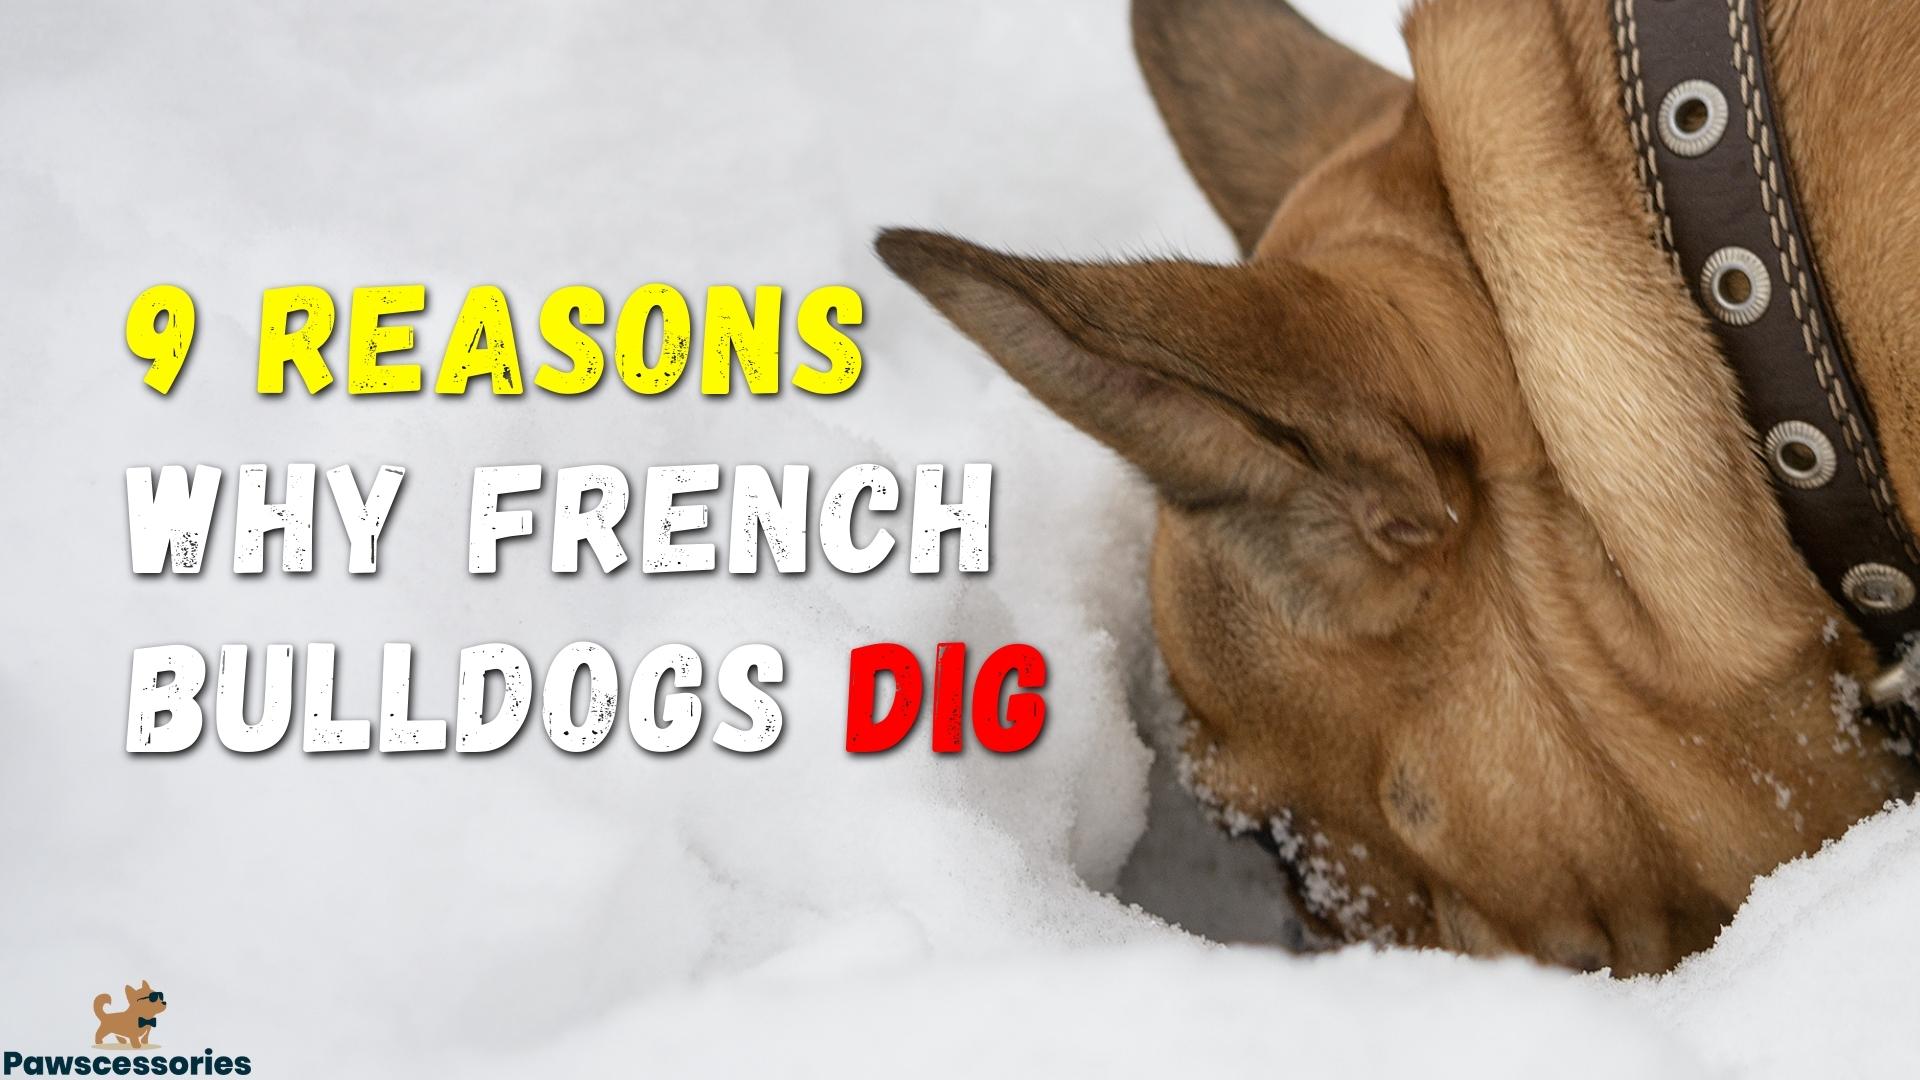 9 Reasons Why French Bulldogs Dig + Simple Tips To Stop It